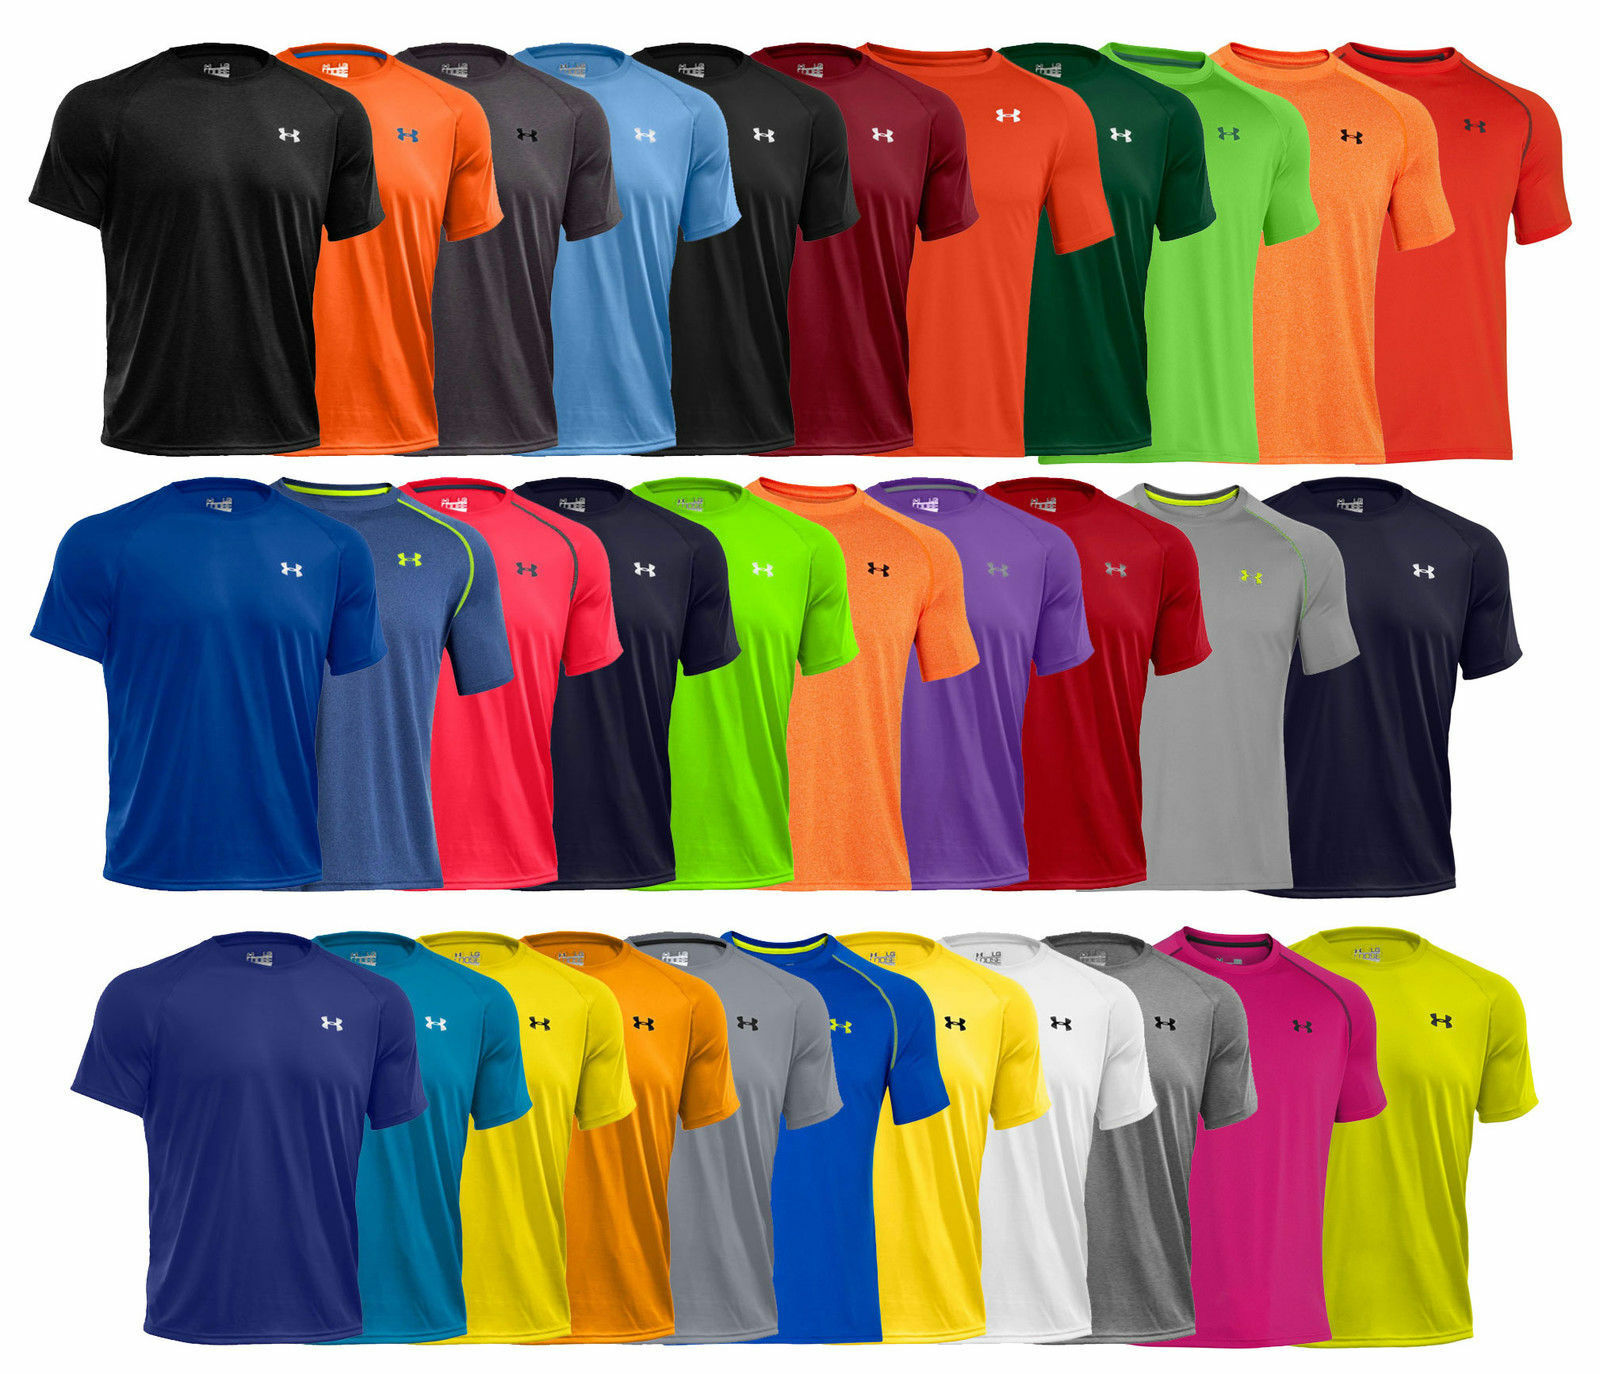 New Under Armour Tech Men's Athletic Short Sleeve T Shirt 1228539 All Colors